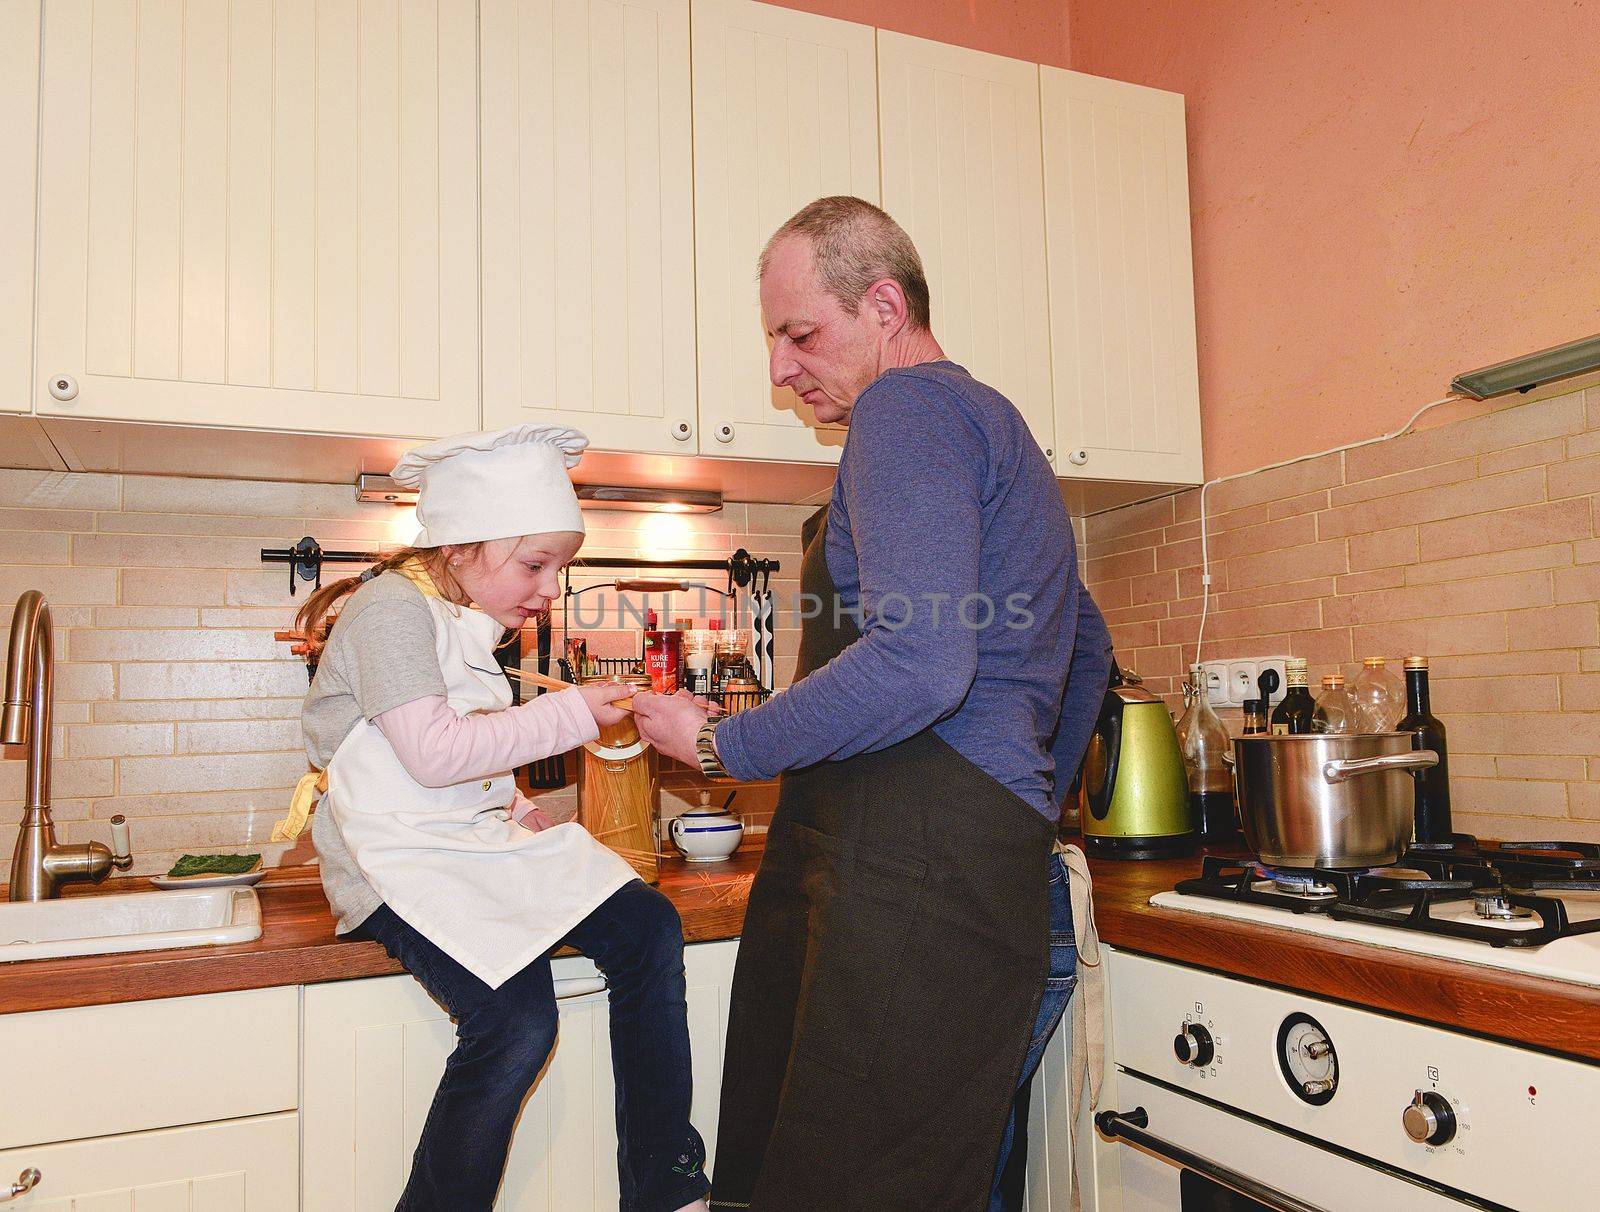 Daughter and father in the kitchen preparing spaghetti to dinner by roman_nerud